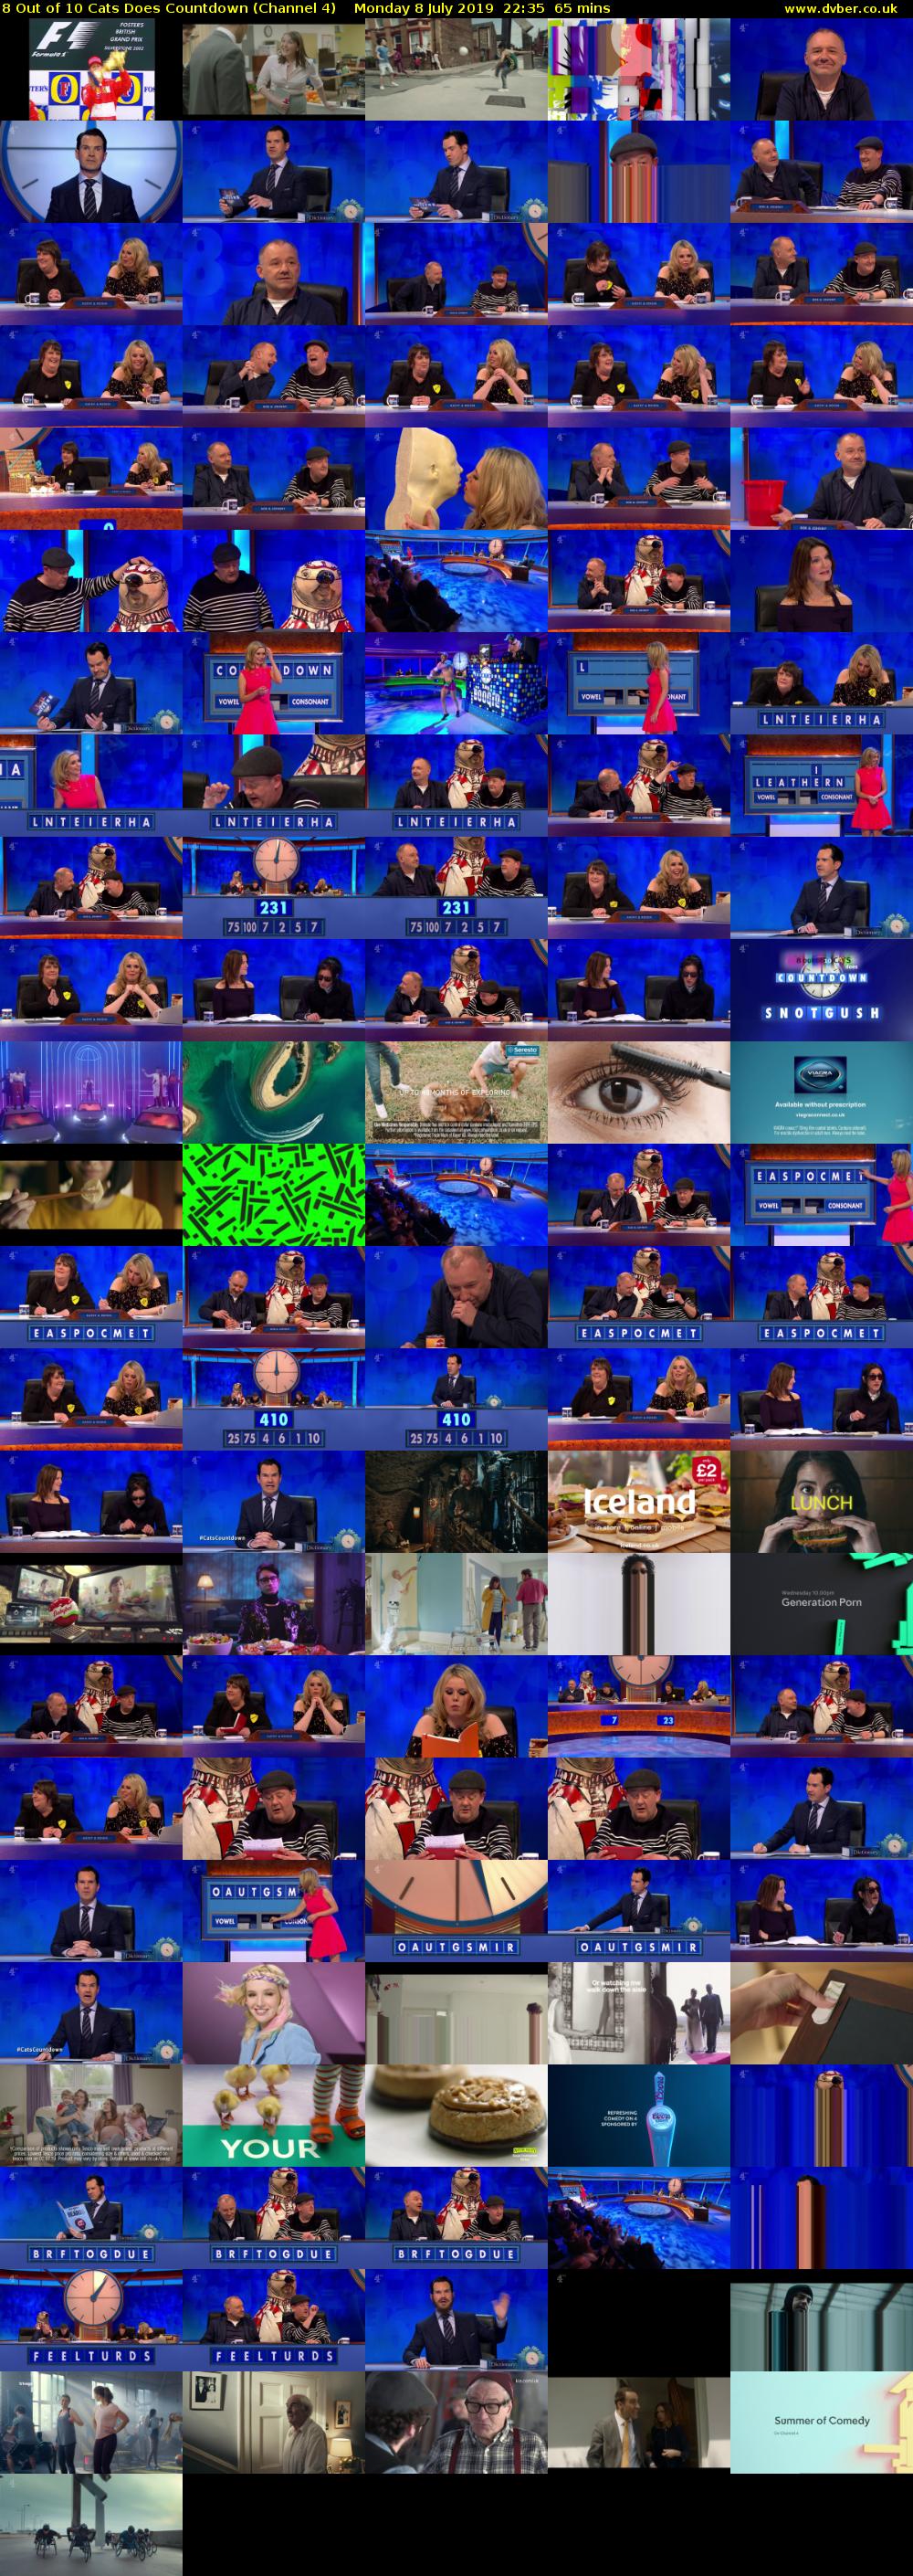 8 Out of 10 Cats Does Countdown (Channel 4) Monday 8 July 2019 22:35 - 23:40